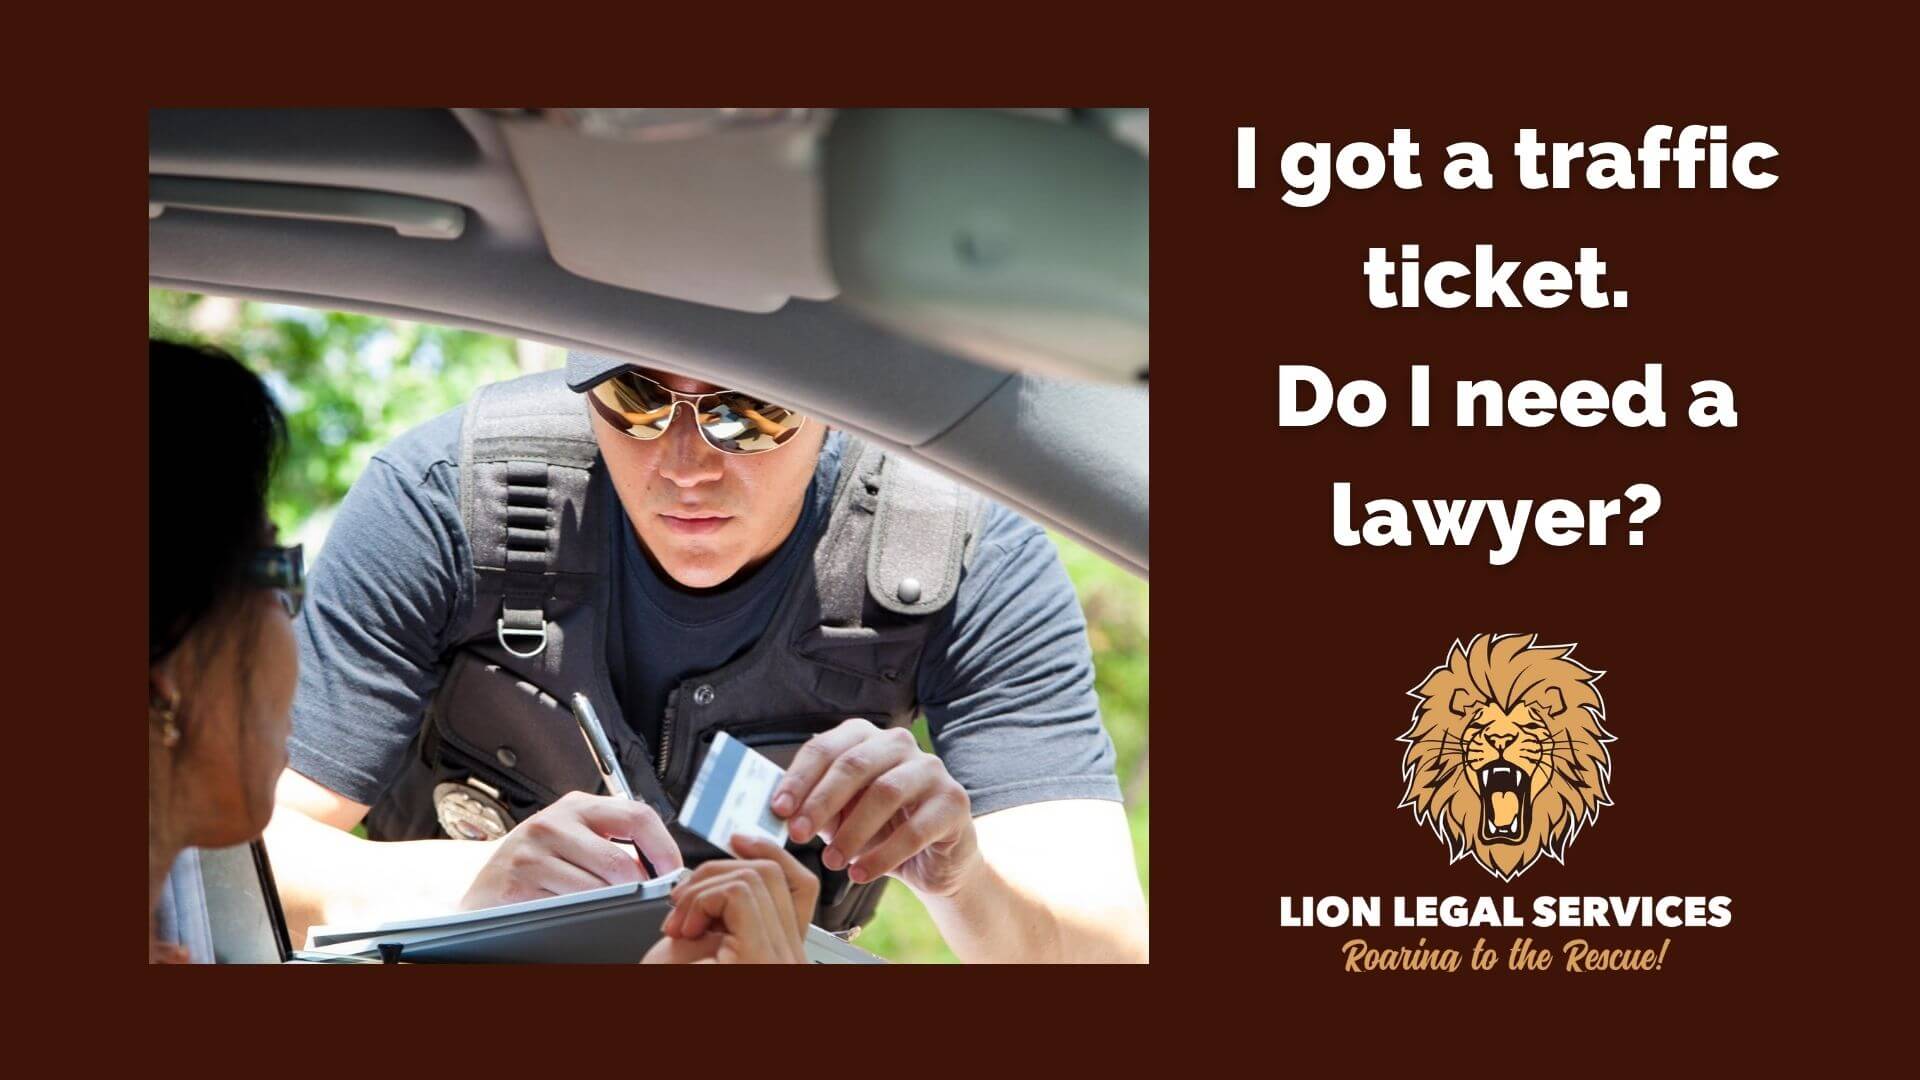 Feature image for the blog post “Do I need a lawyer for a traffic ticket?”